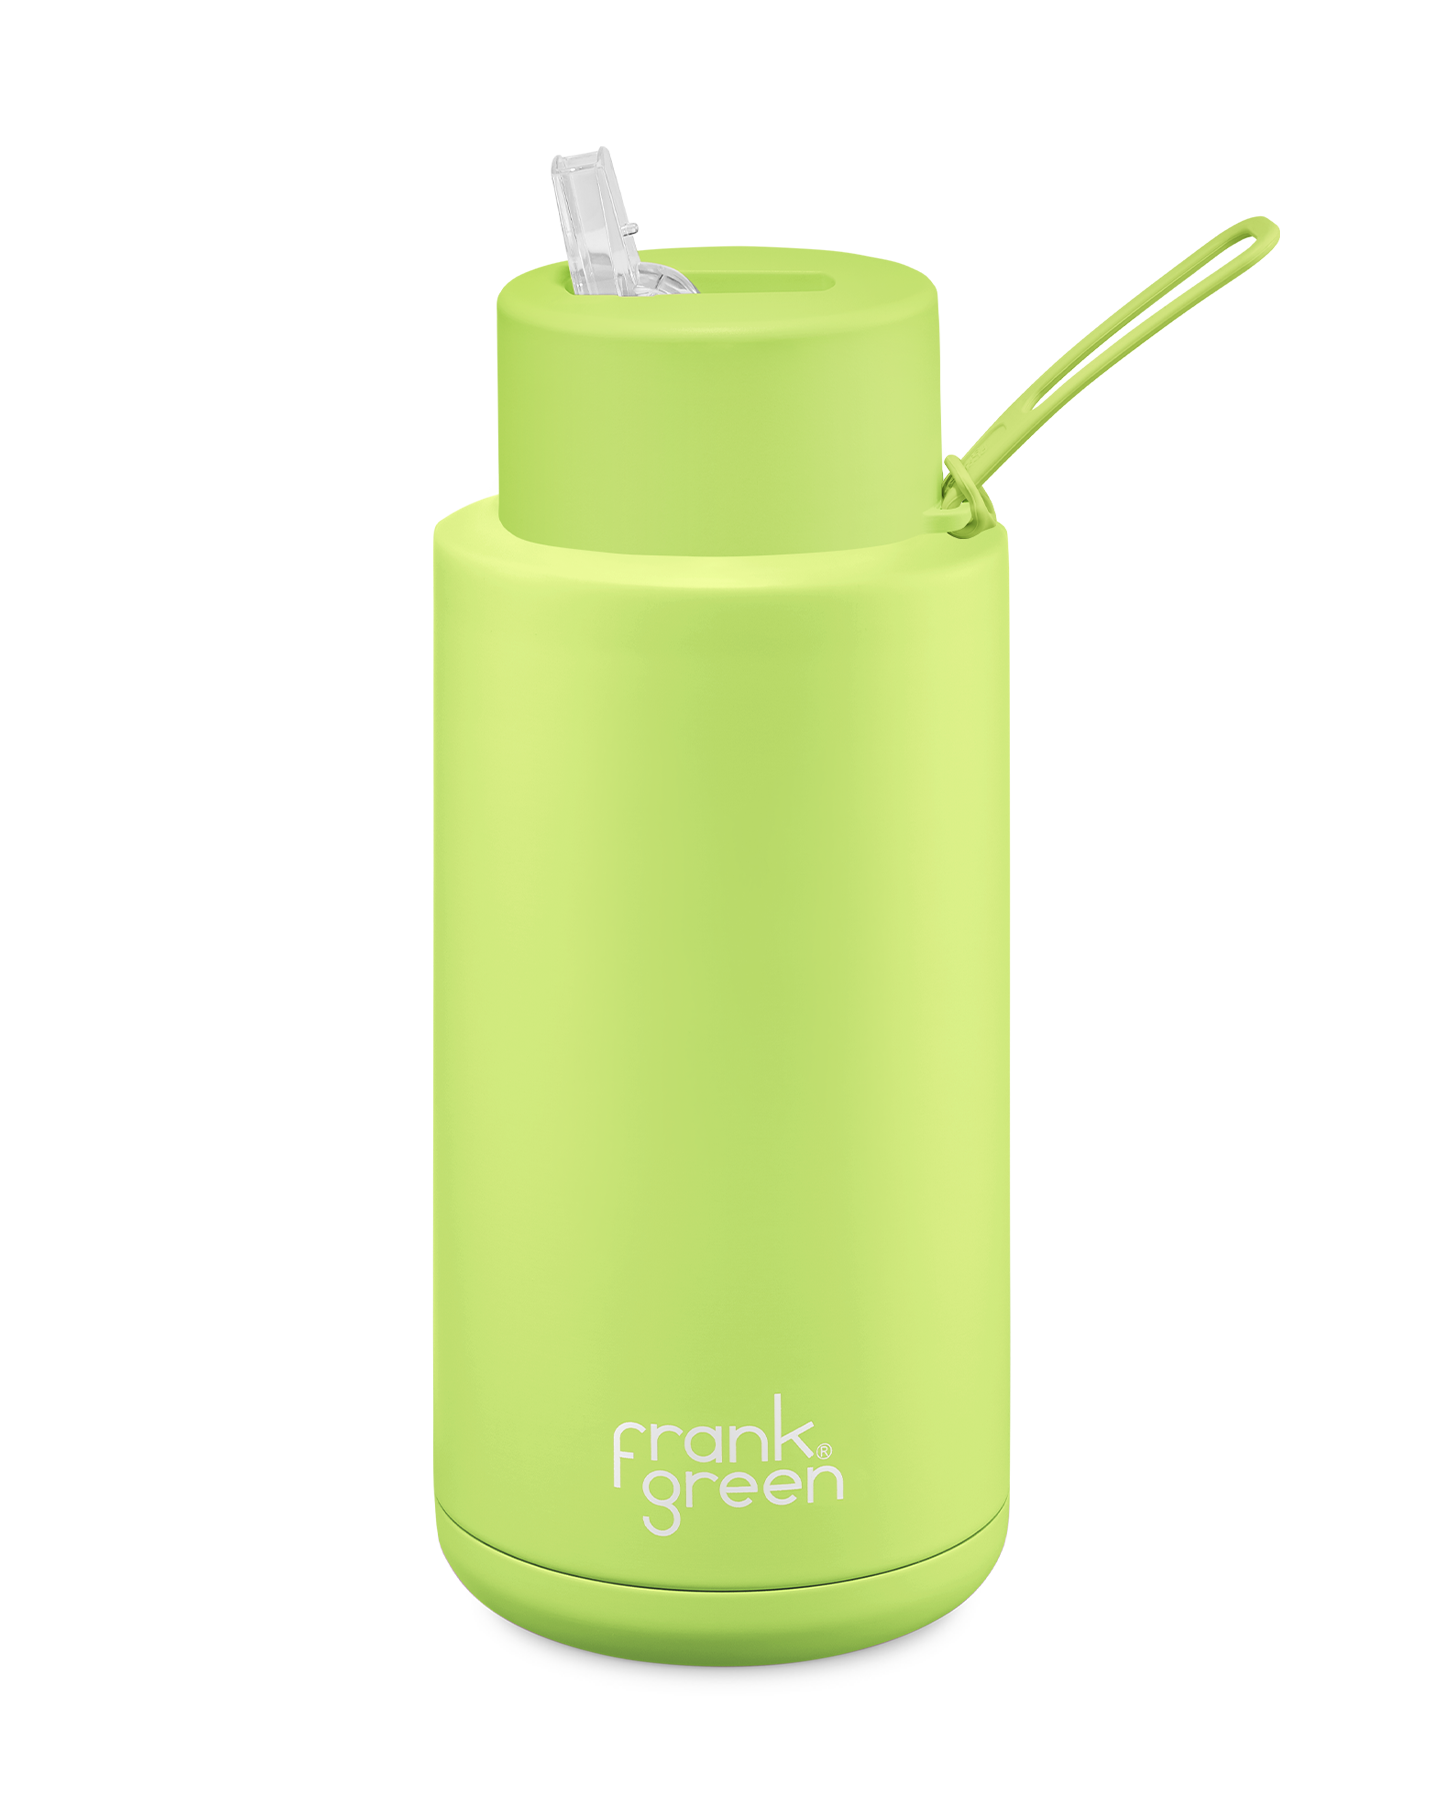 FRANK GREEN CERAMIC REUSABLE BOTTLE 34oz/1 LITRE WITH STRAW LID - PISTACHIO GREEN